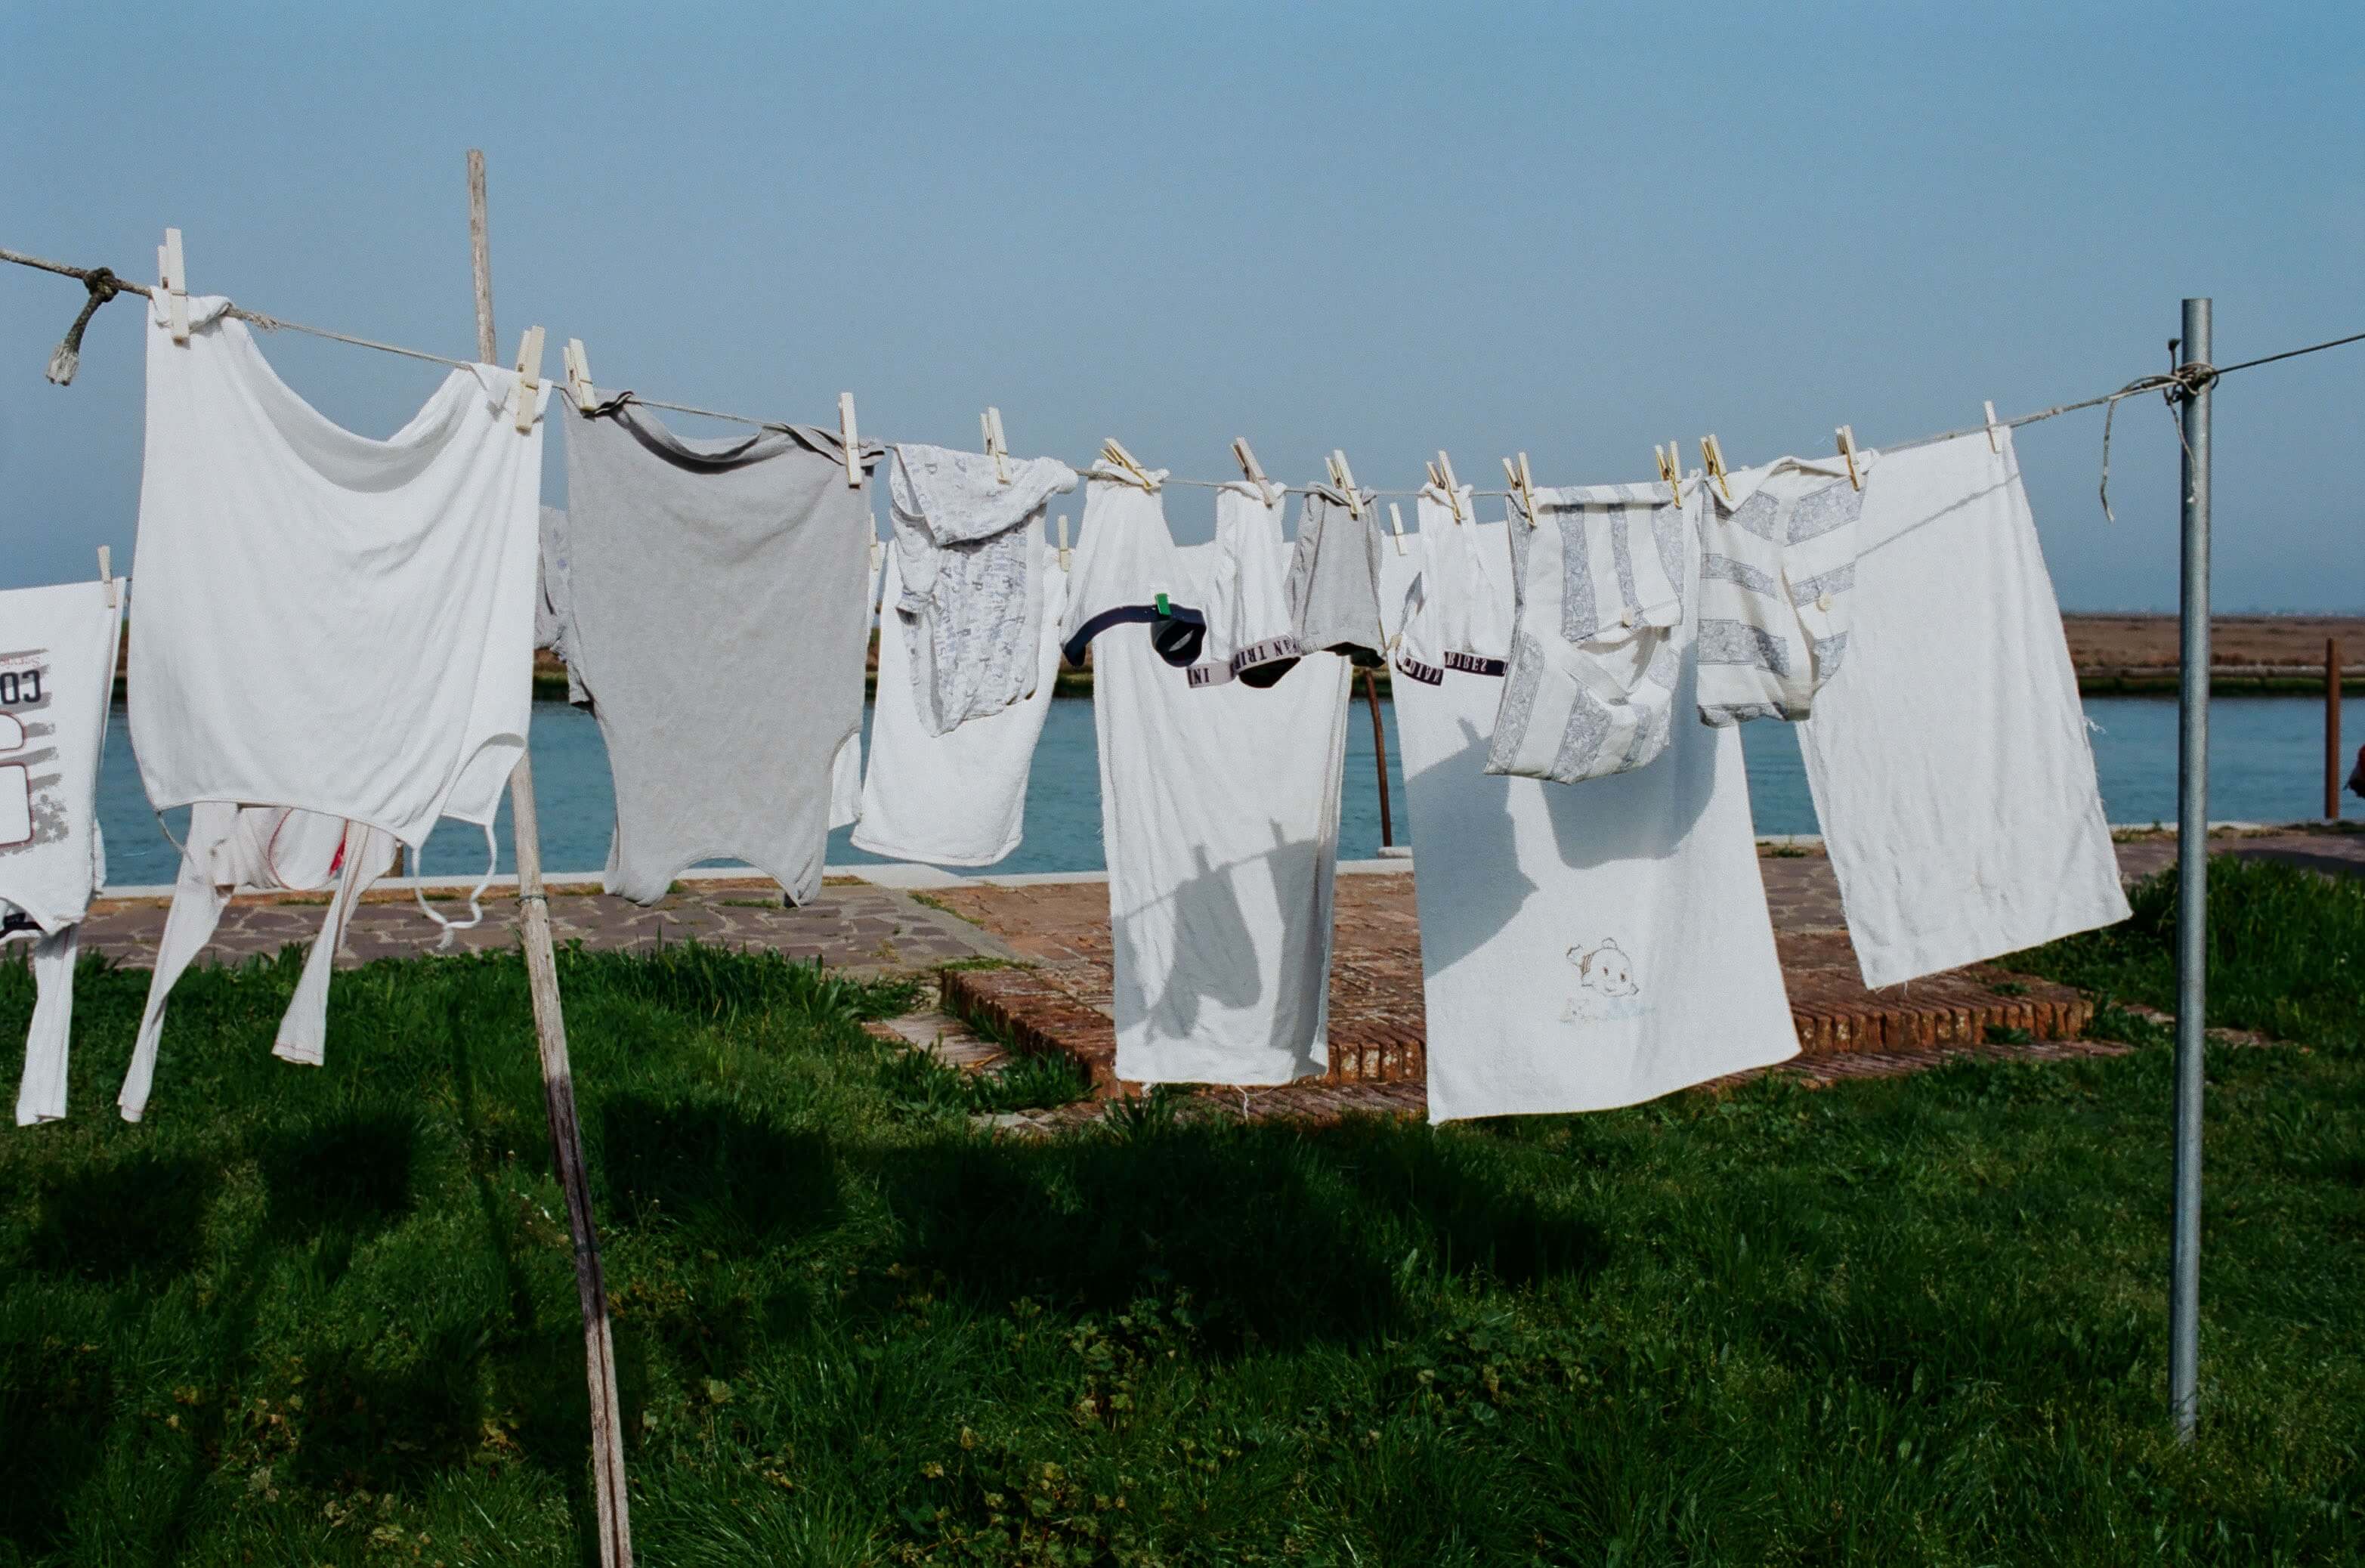 Laundry being hanged to dry.